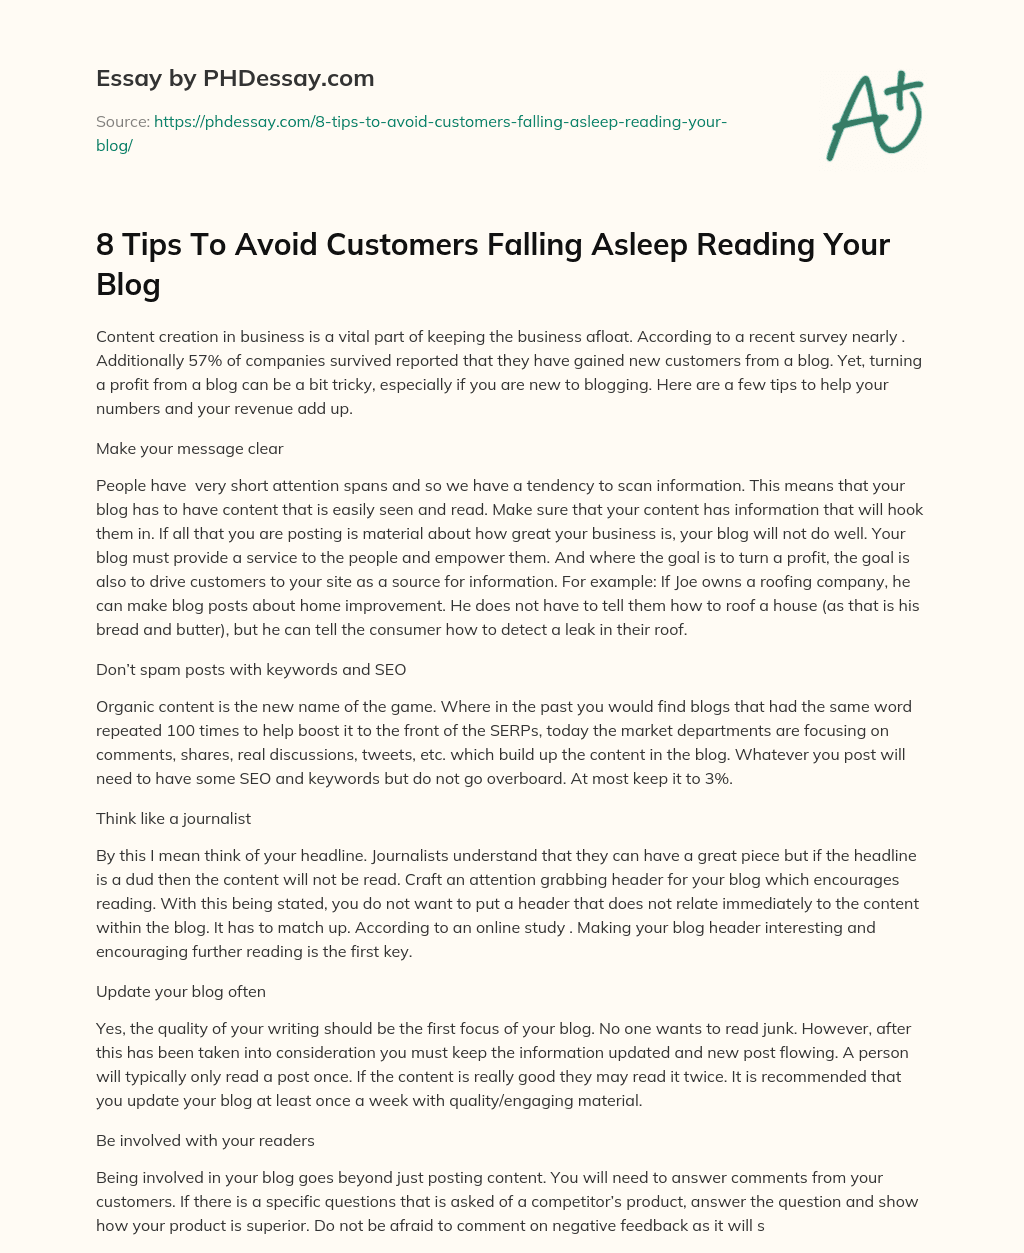 8 Tips To Avoid Customers Falling Asleep Reading Your Blog essay